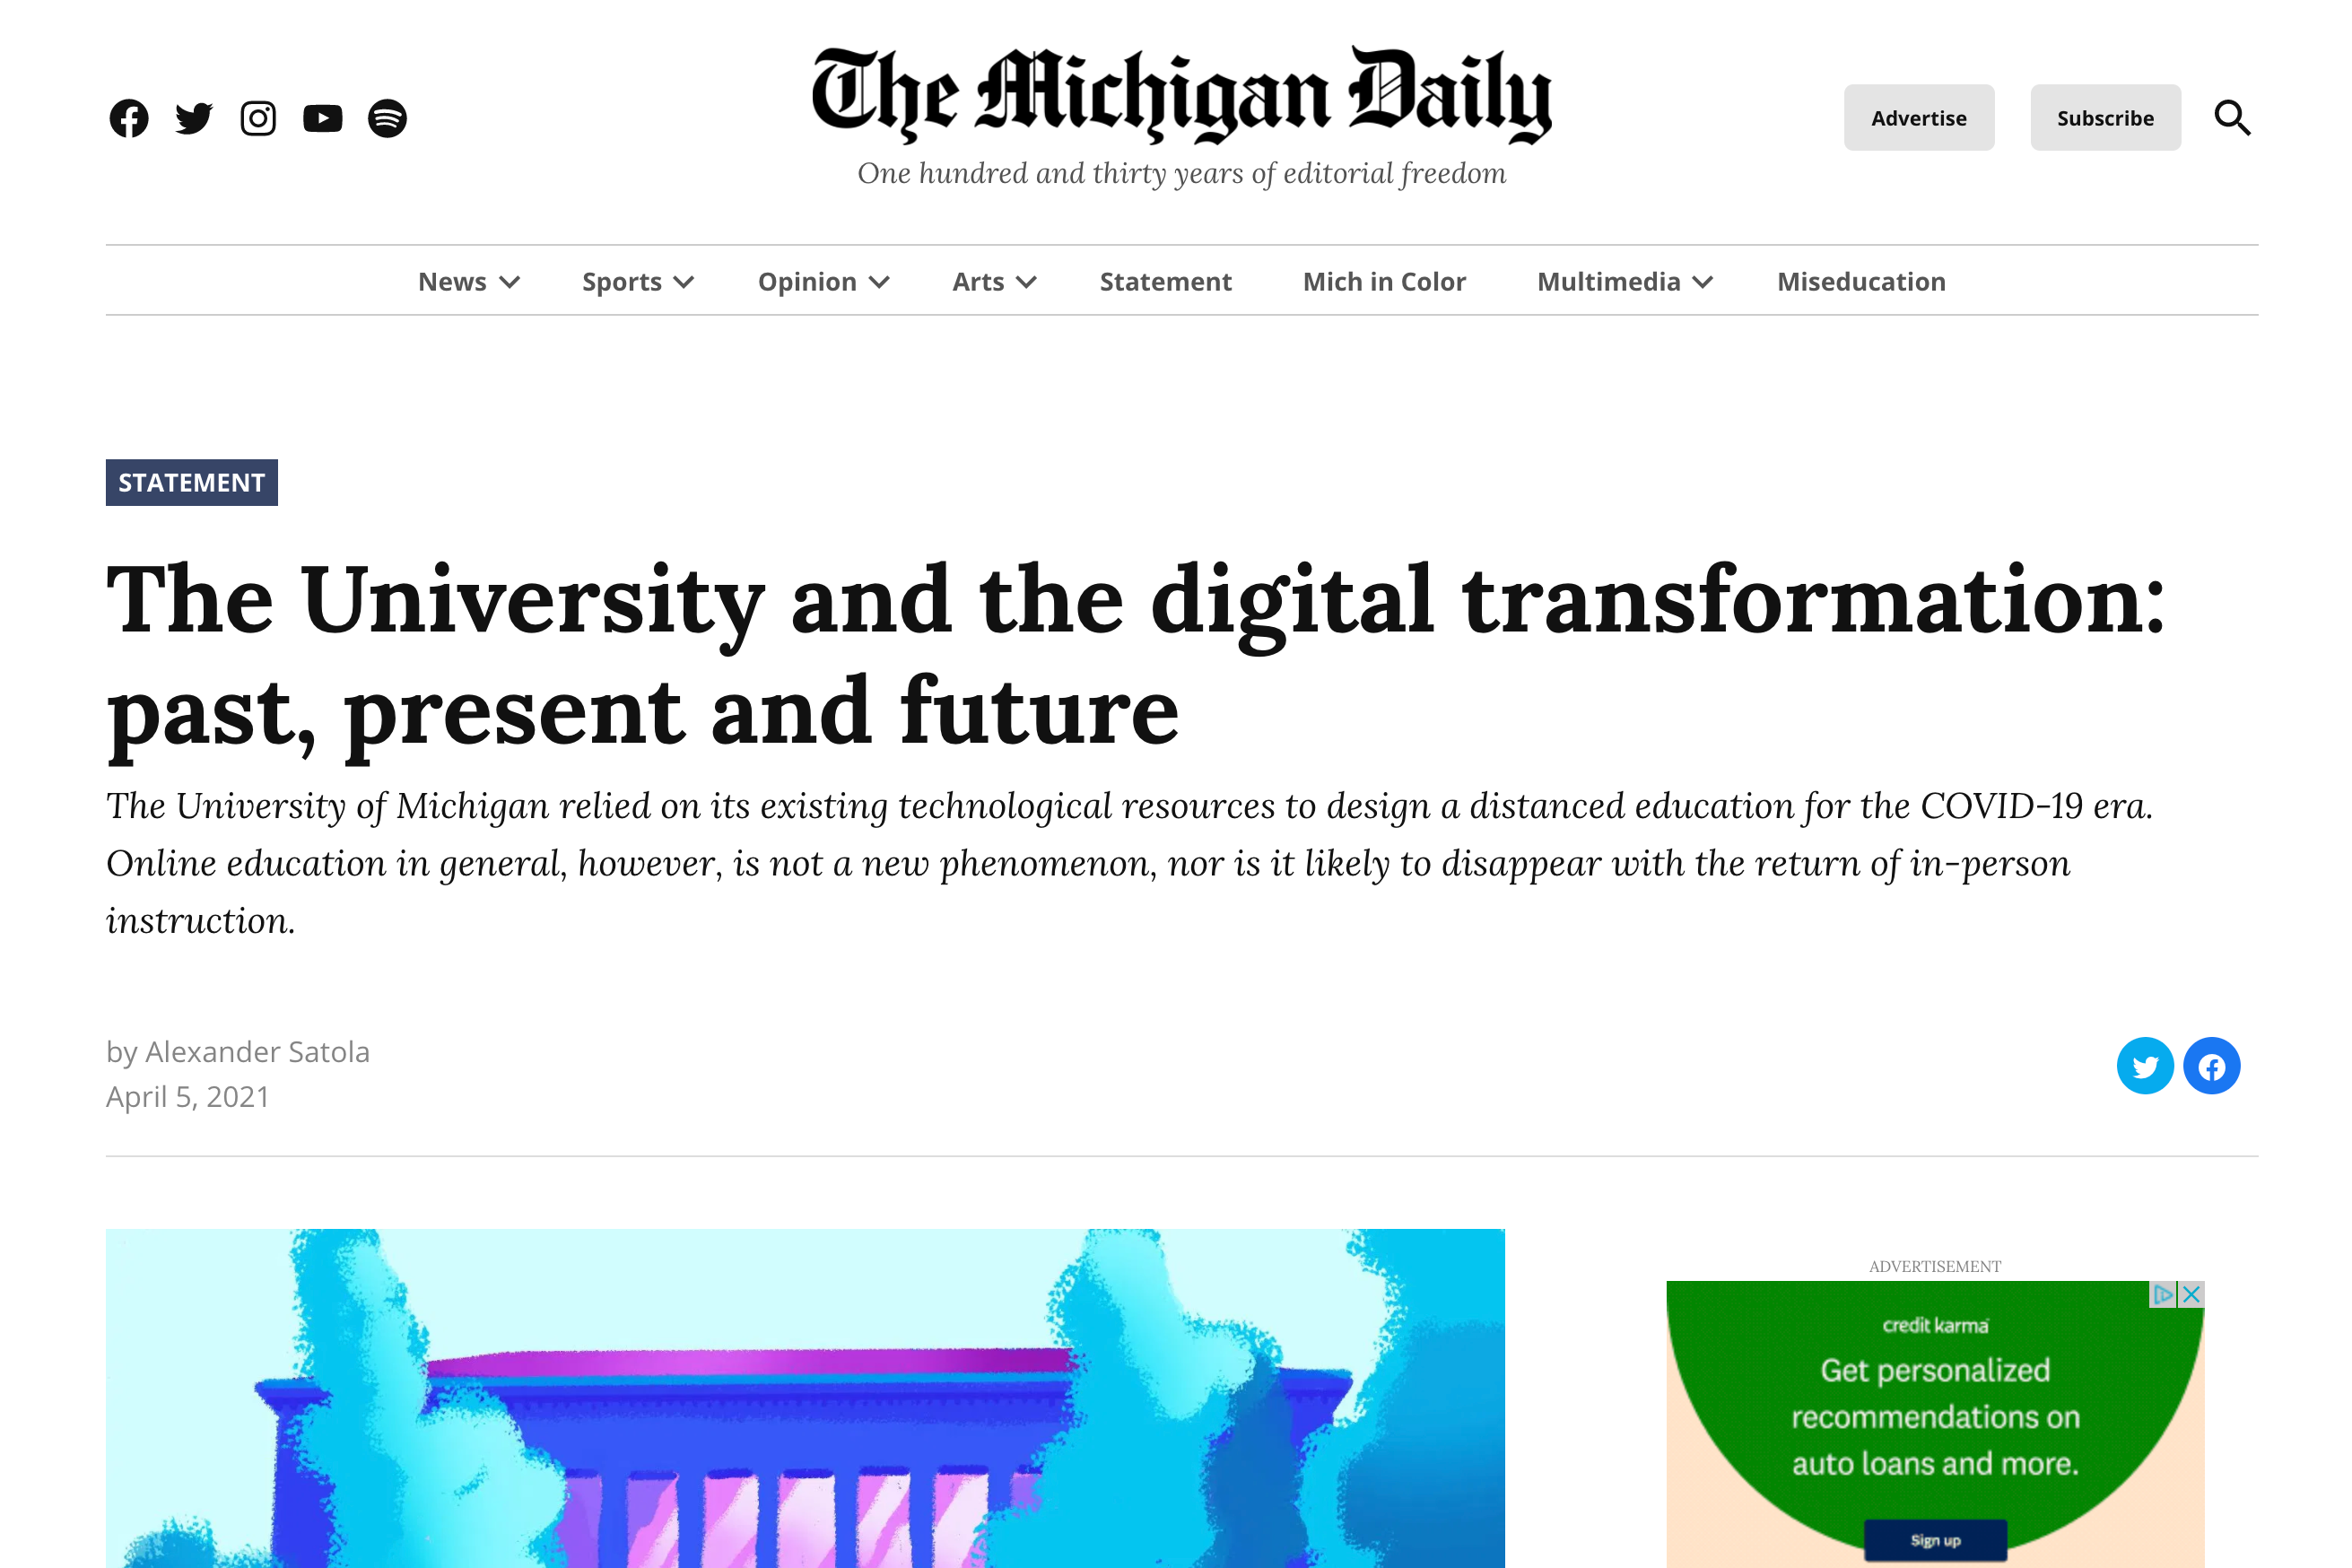 The University and the digital transformation: past, present and future